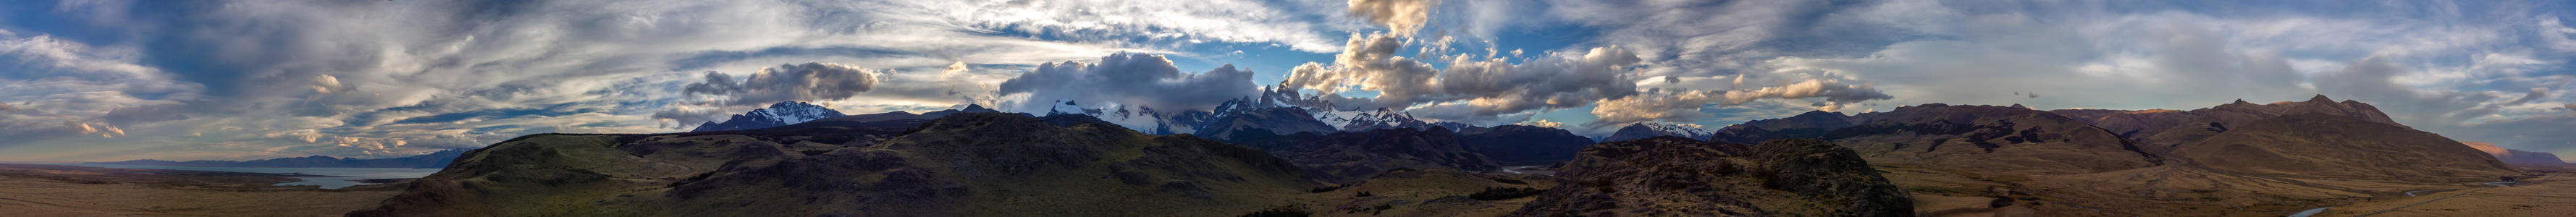 360 Degree View from Las Aguilas - Fitz Roy from the far end of the national park which surrounds El Chalten